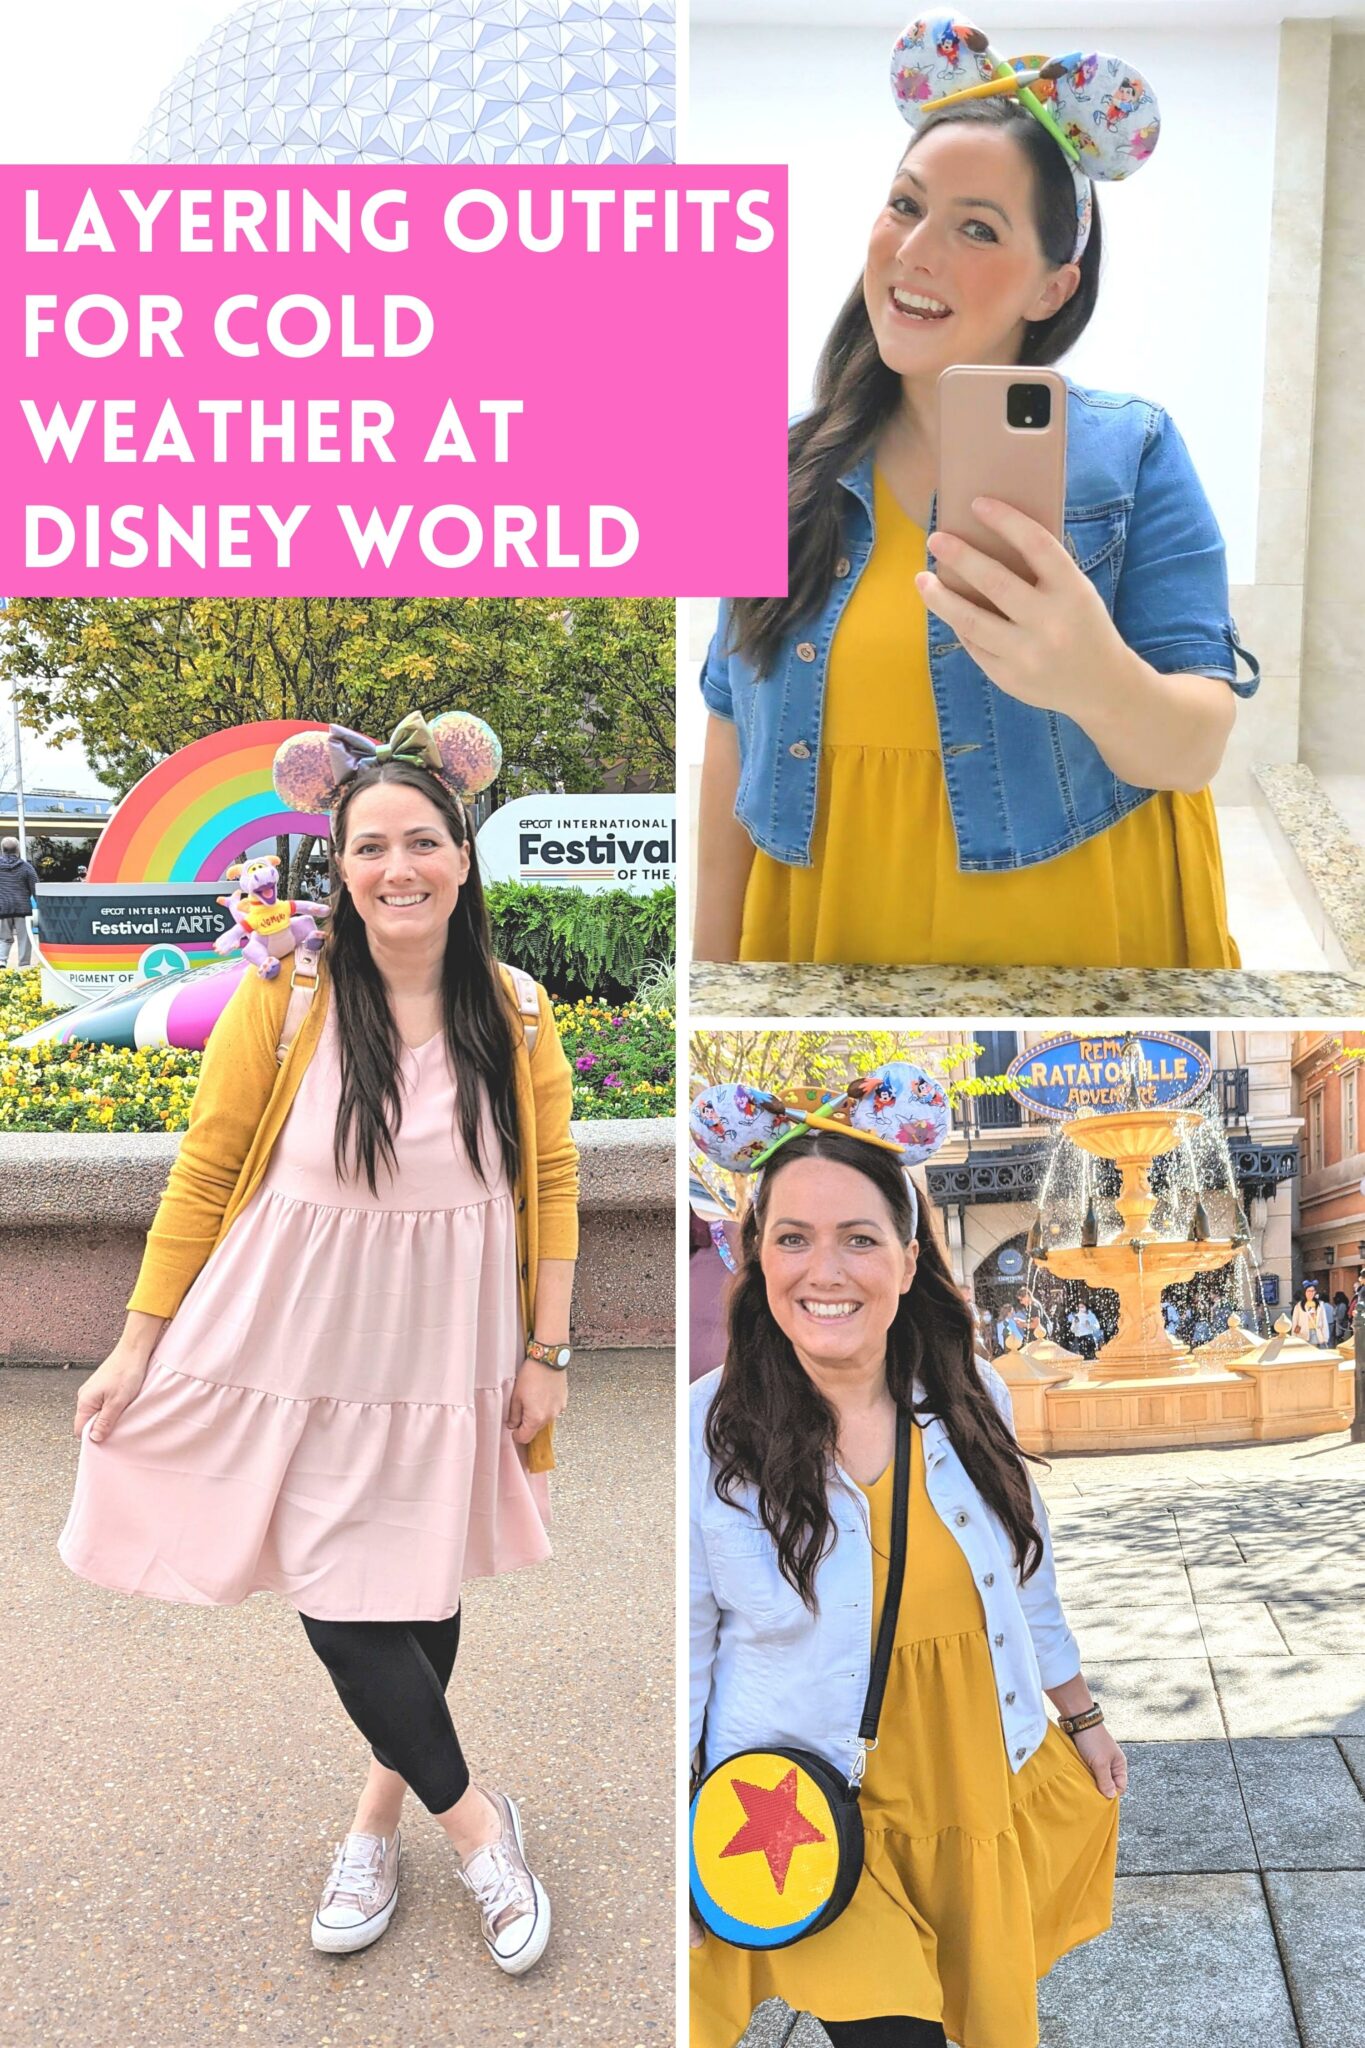 How to Dress for Cold Weather at Disney World and Still Look Cute All Things with Purpose Sarah Lemp 5